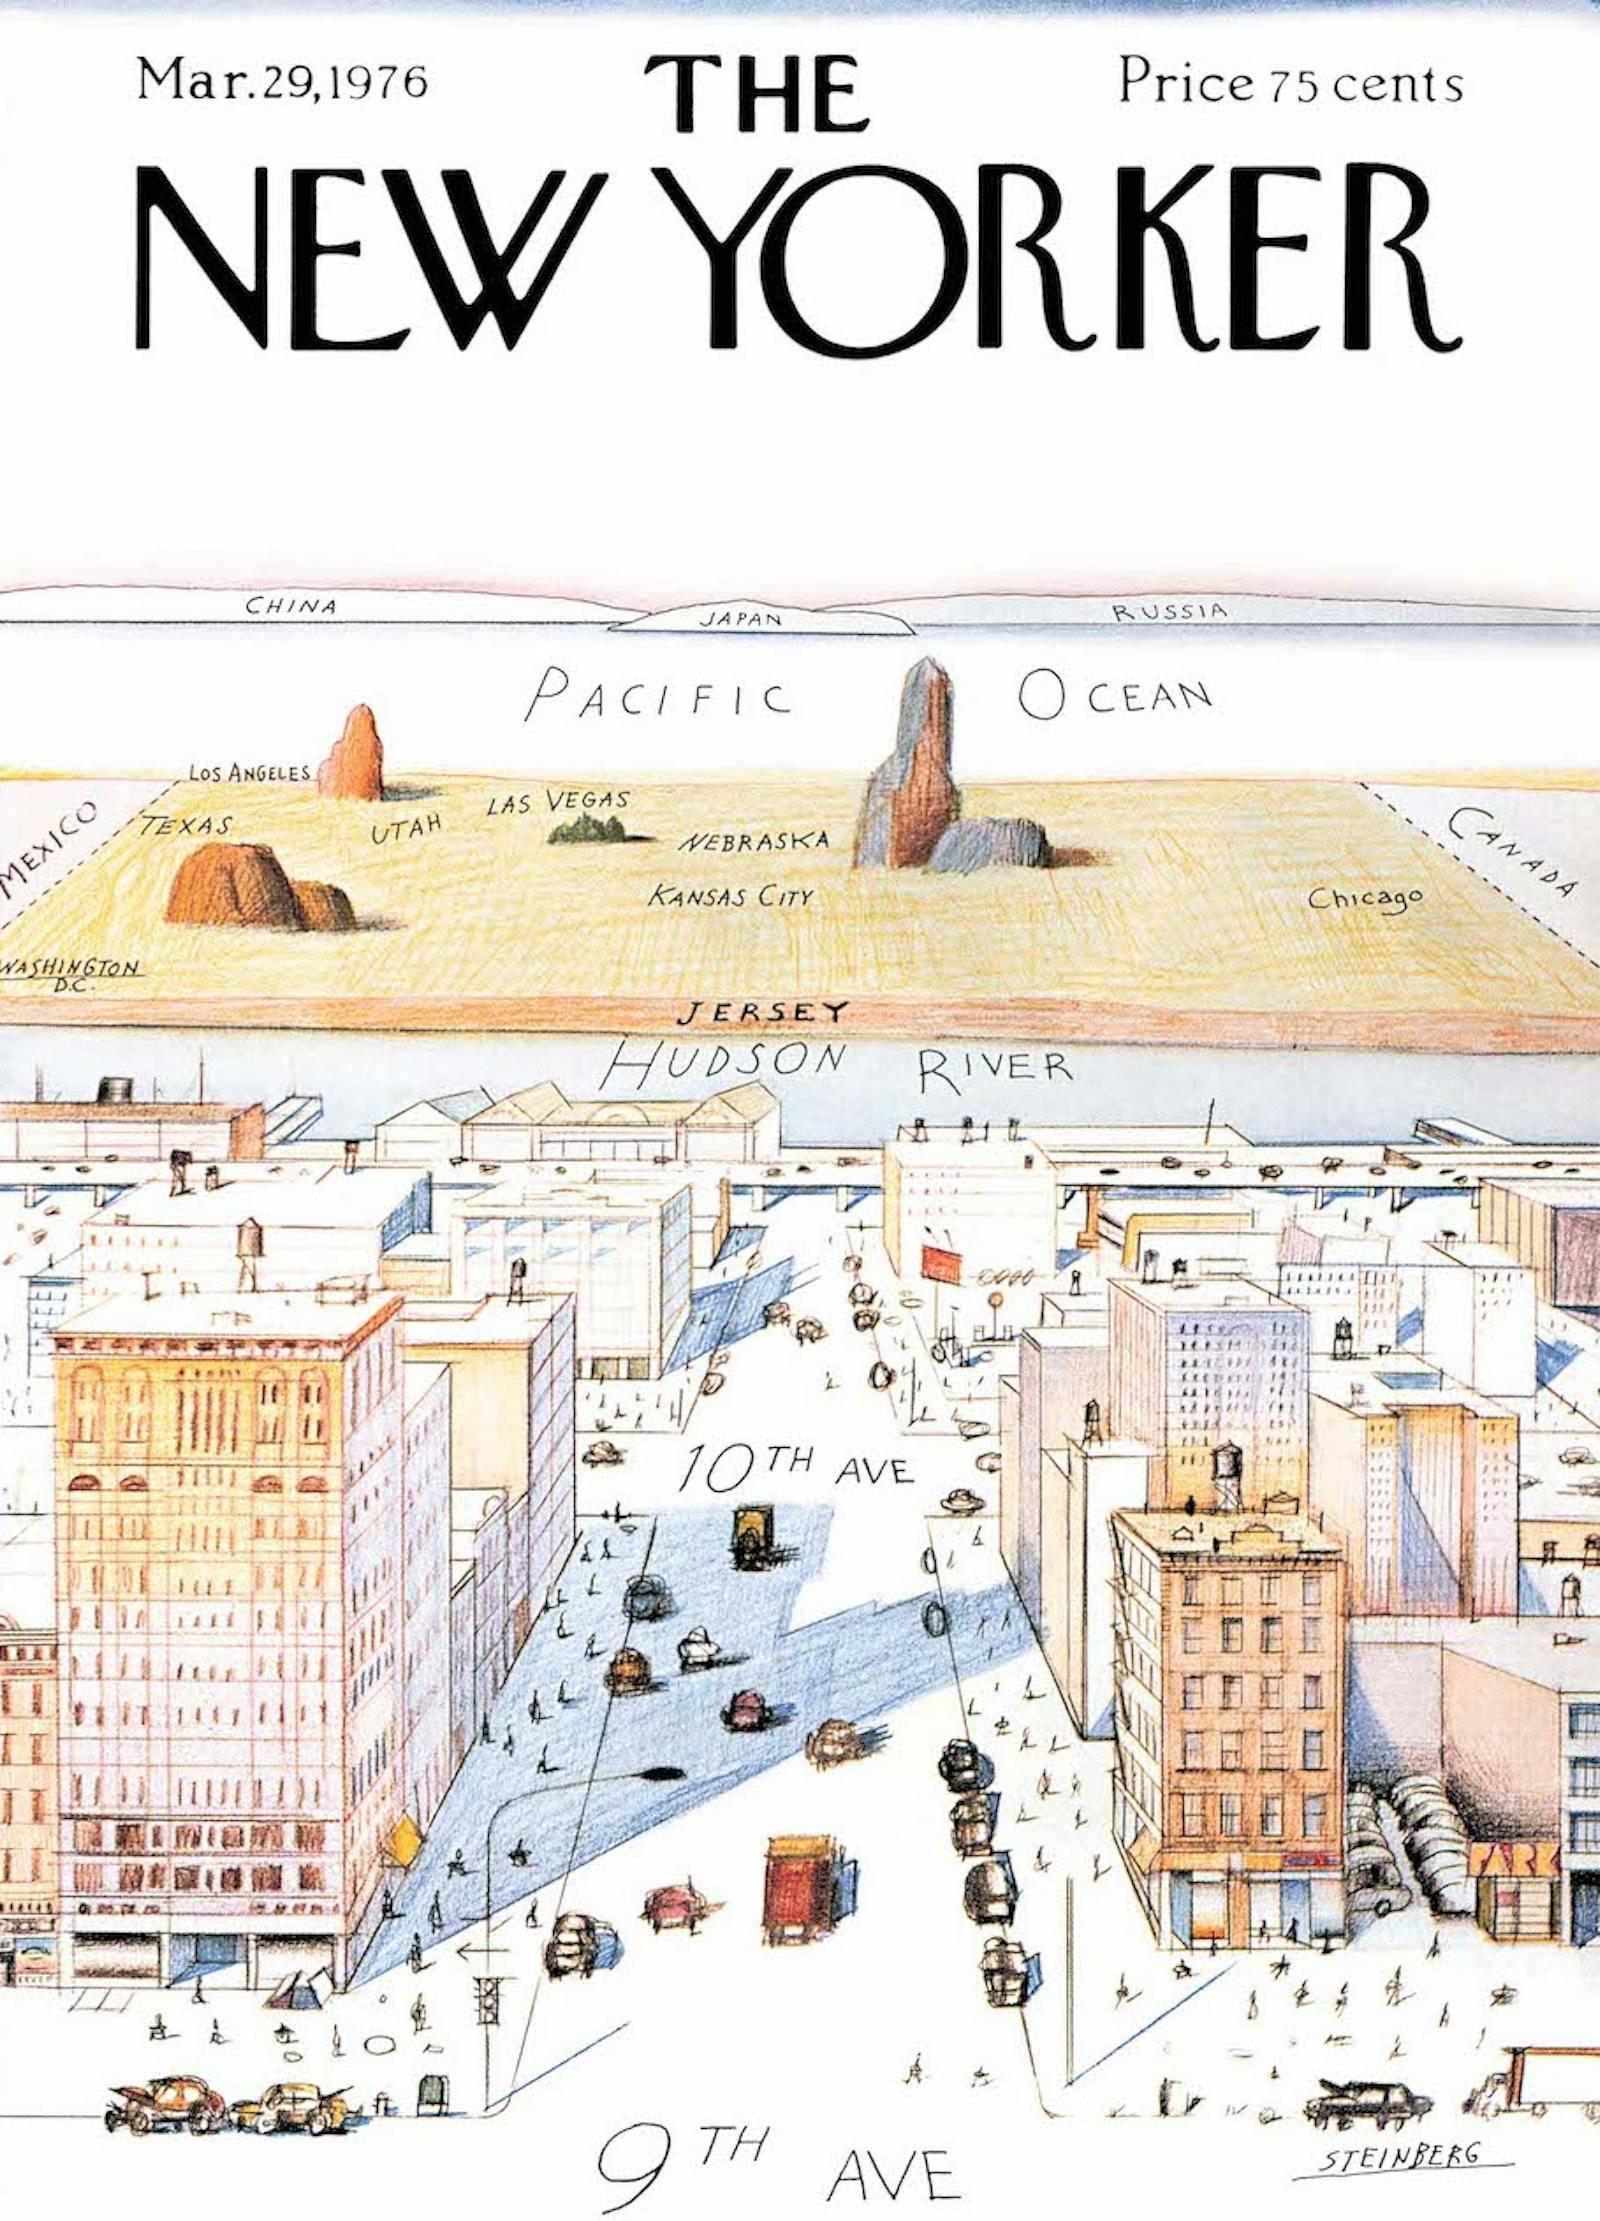 Saul Steinberg, Cover of The New Yorker, Mar.29, 1976 © The Saul Steinberg Foundation /Artists Rights Society (ARS), New York. Cover reprinted with permission of The New Yorker magazine. All rights reserved. 